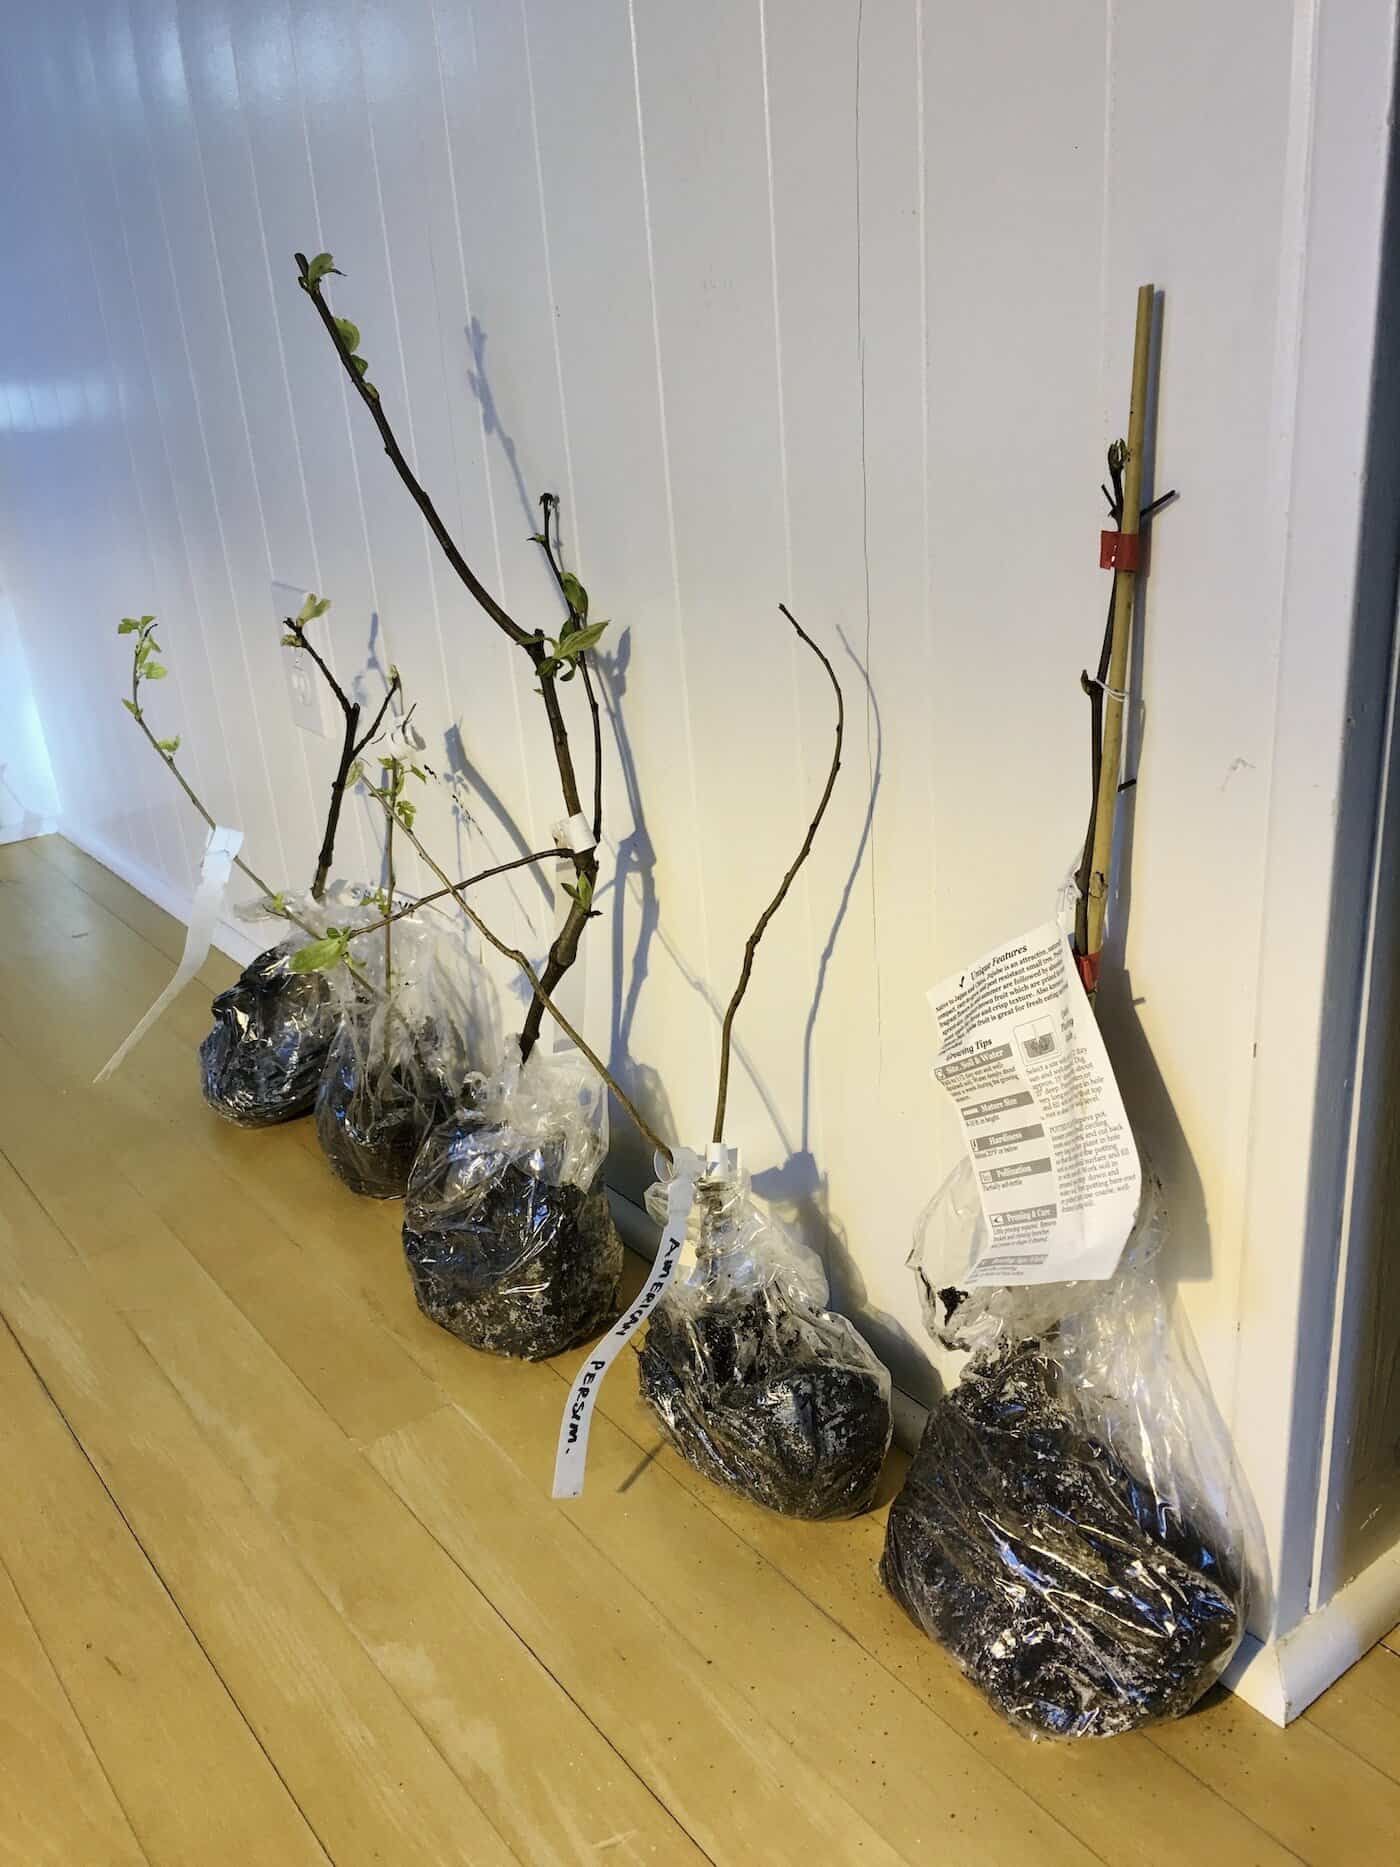 Bare root trees after being shipped